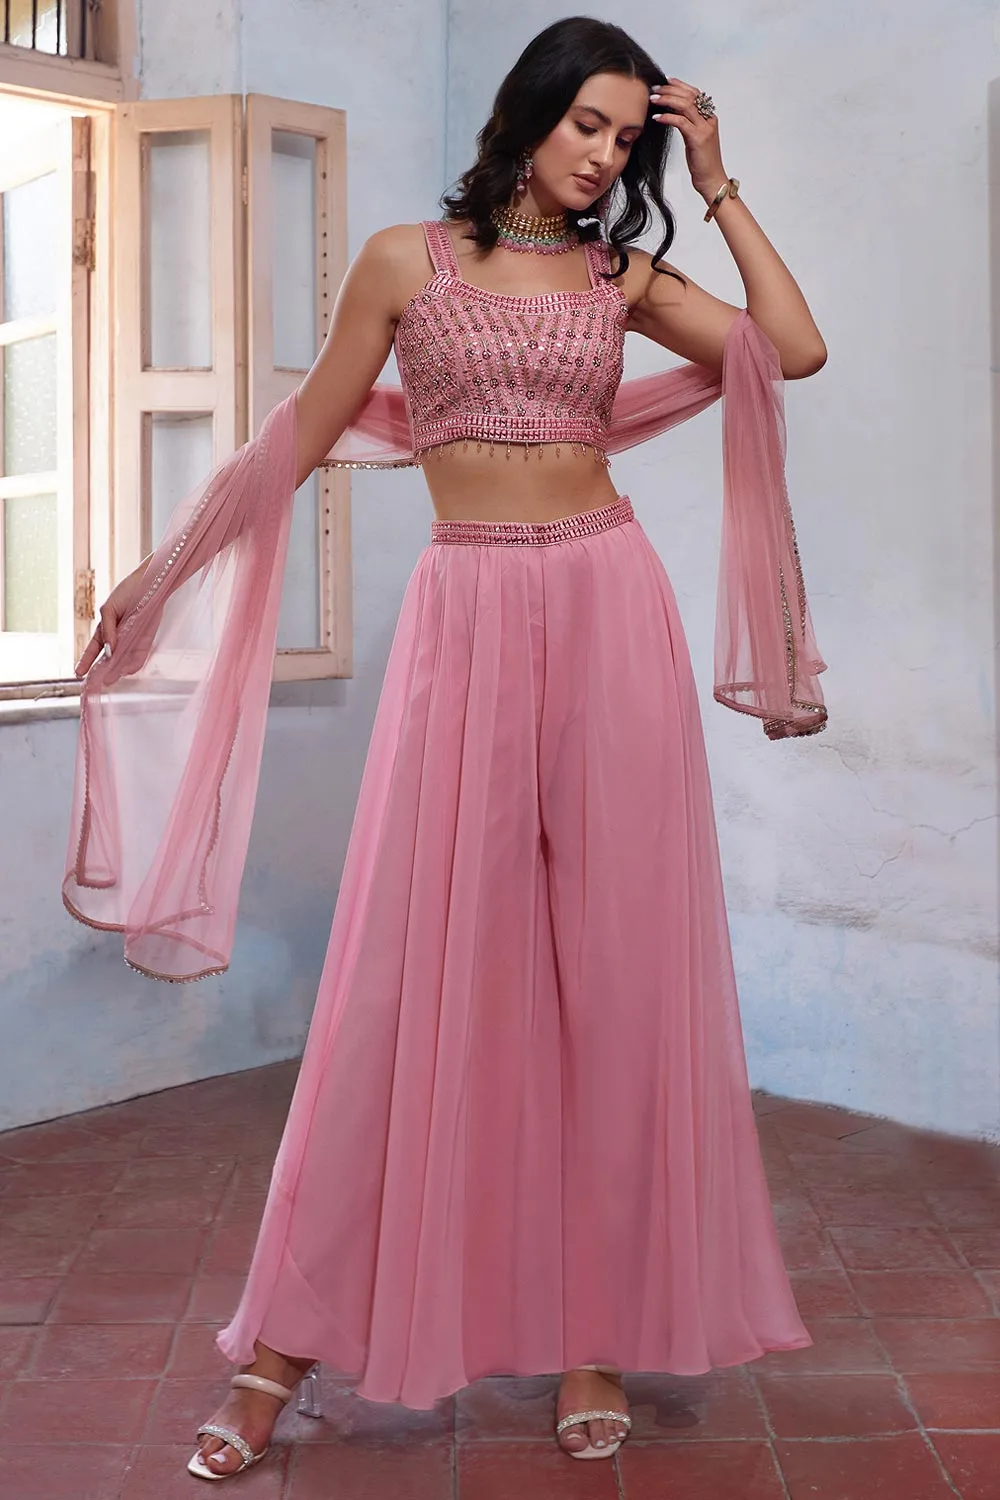 Sparkling in Pink: Embroidered Georgette Lehenga with Shimmering Details